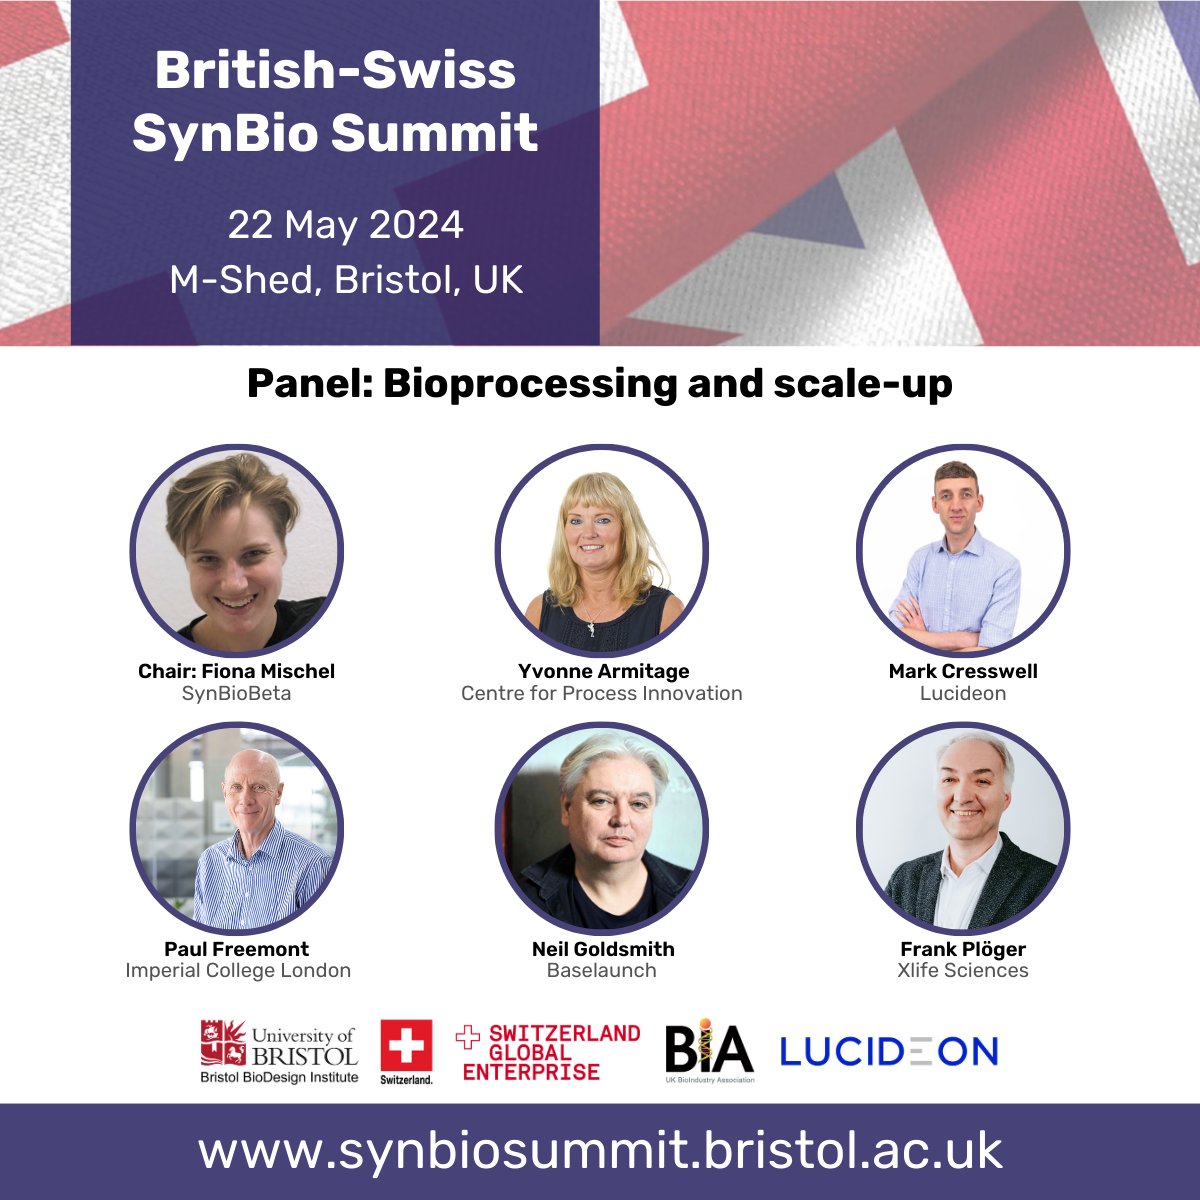 The British-Swiss #SynBioSummit is just over five weeks away. The event is bringing together 🇨🇭🇬🇧 industry leaders and academic experts to discuss how synthetic and engineering biology can drive #innovation in healthcare. Find out more 👇 synbiosummit.bristol.ac.uk